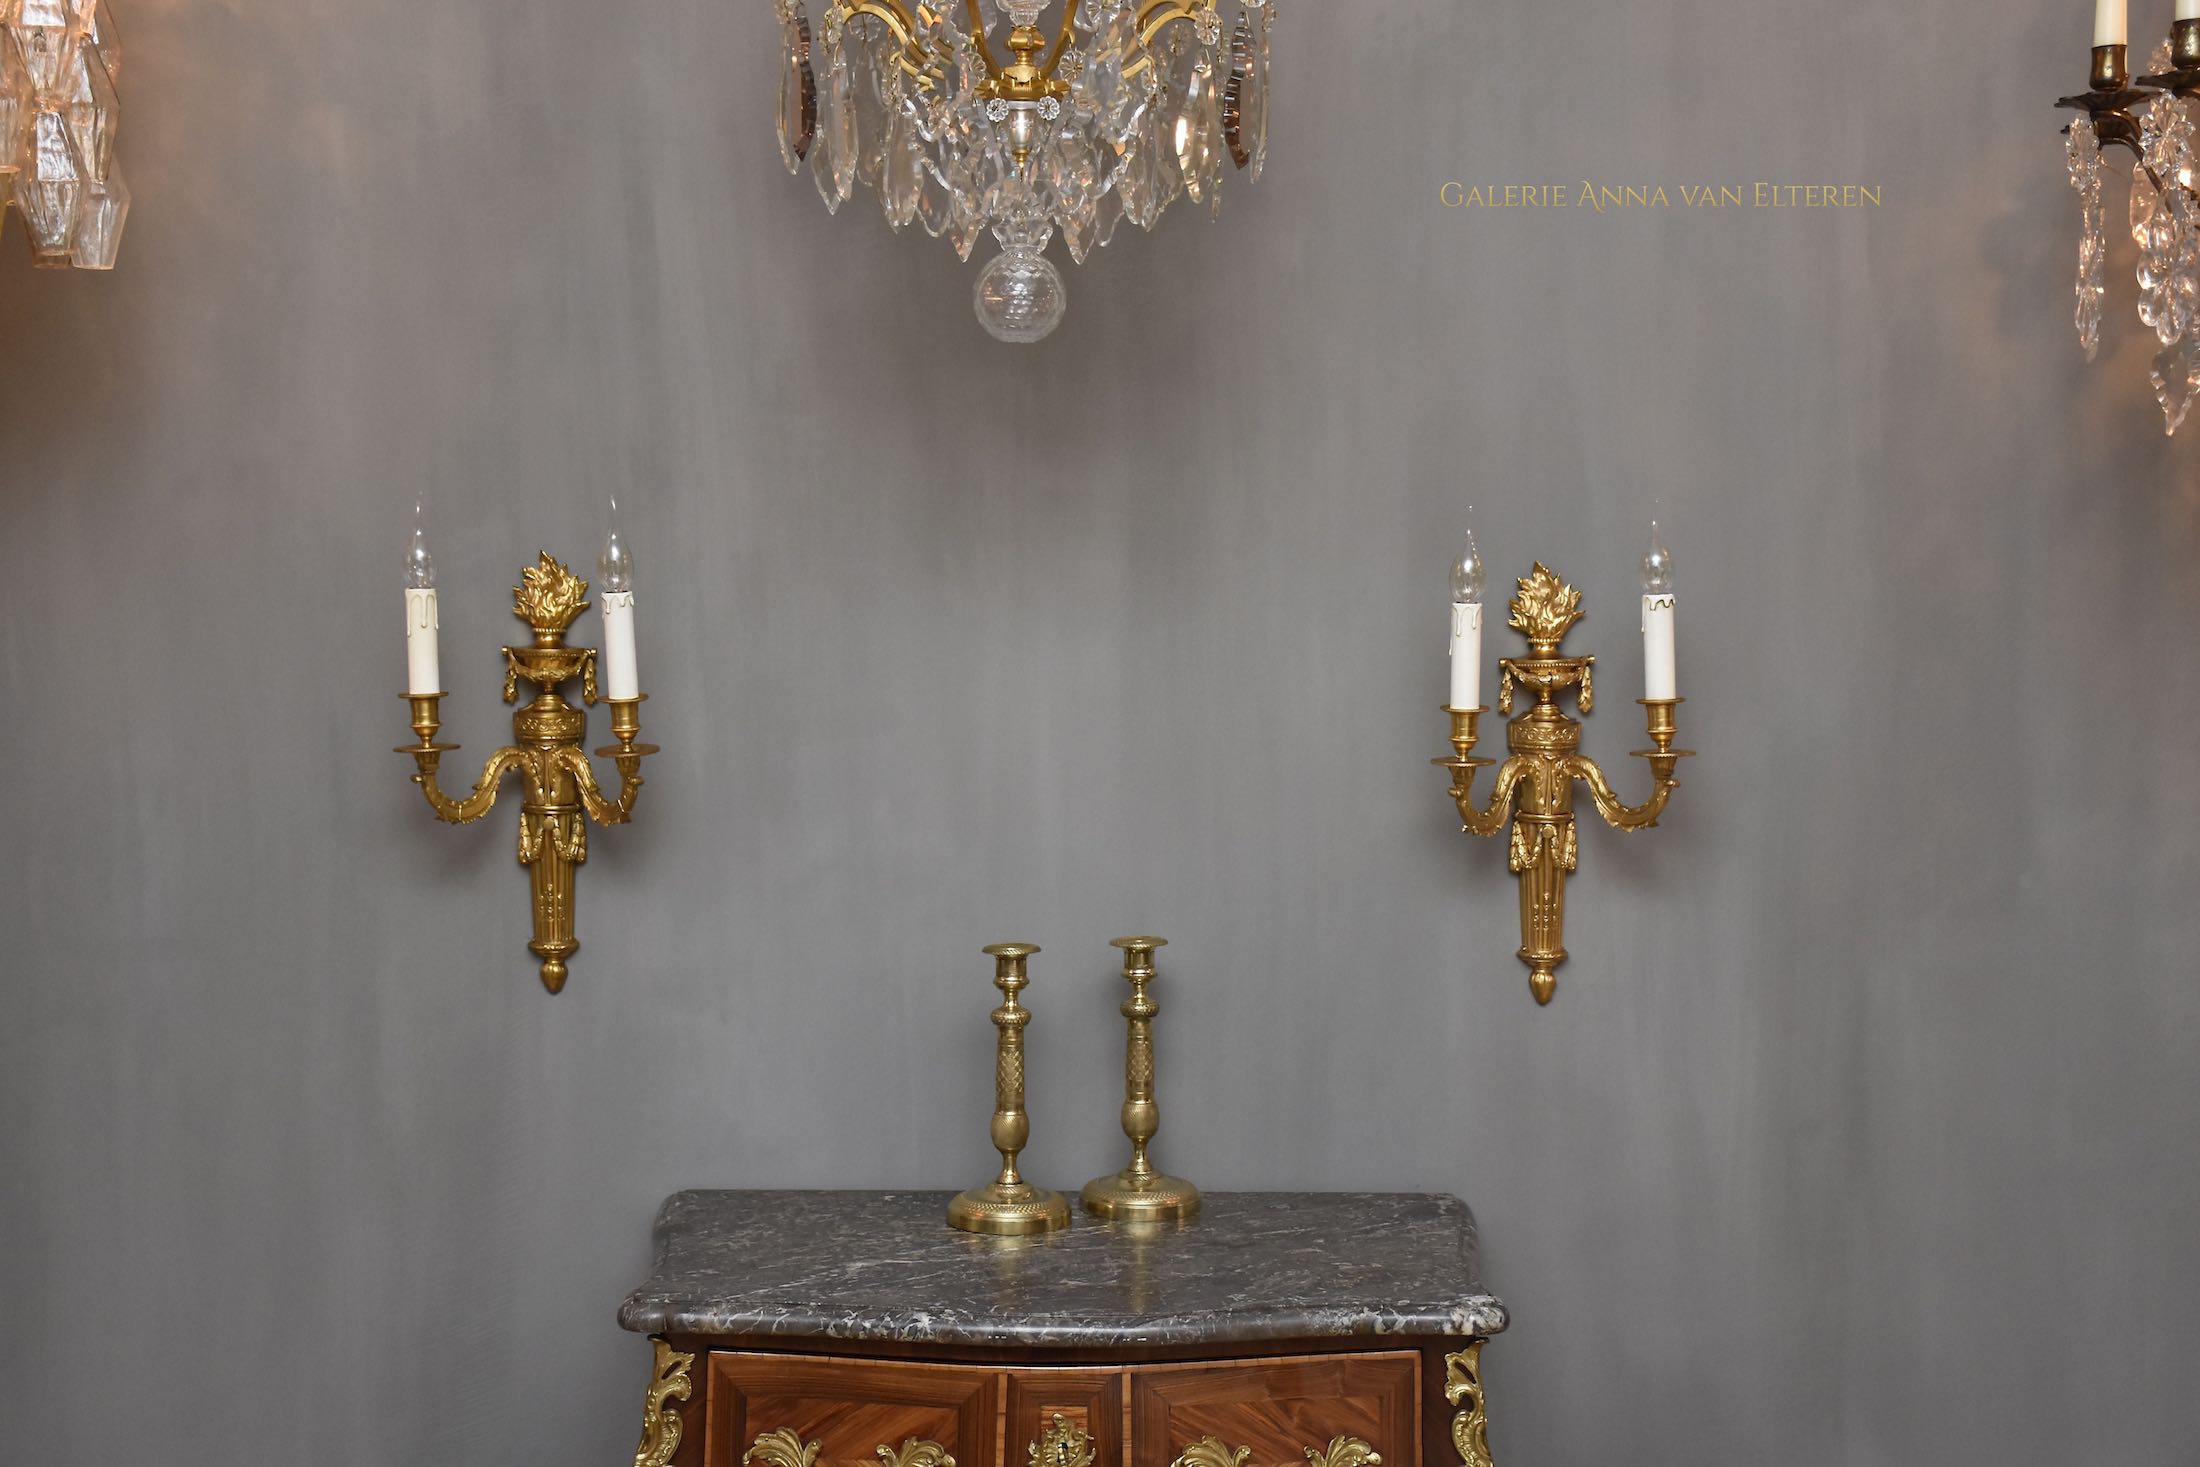 A pair of large gilt bronze French wall appliques in the style of Louis XVI